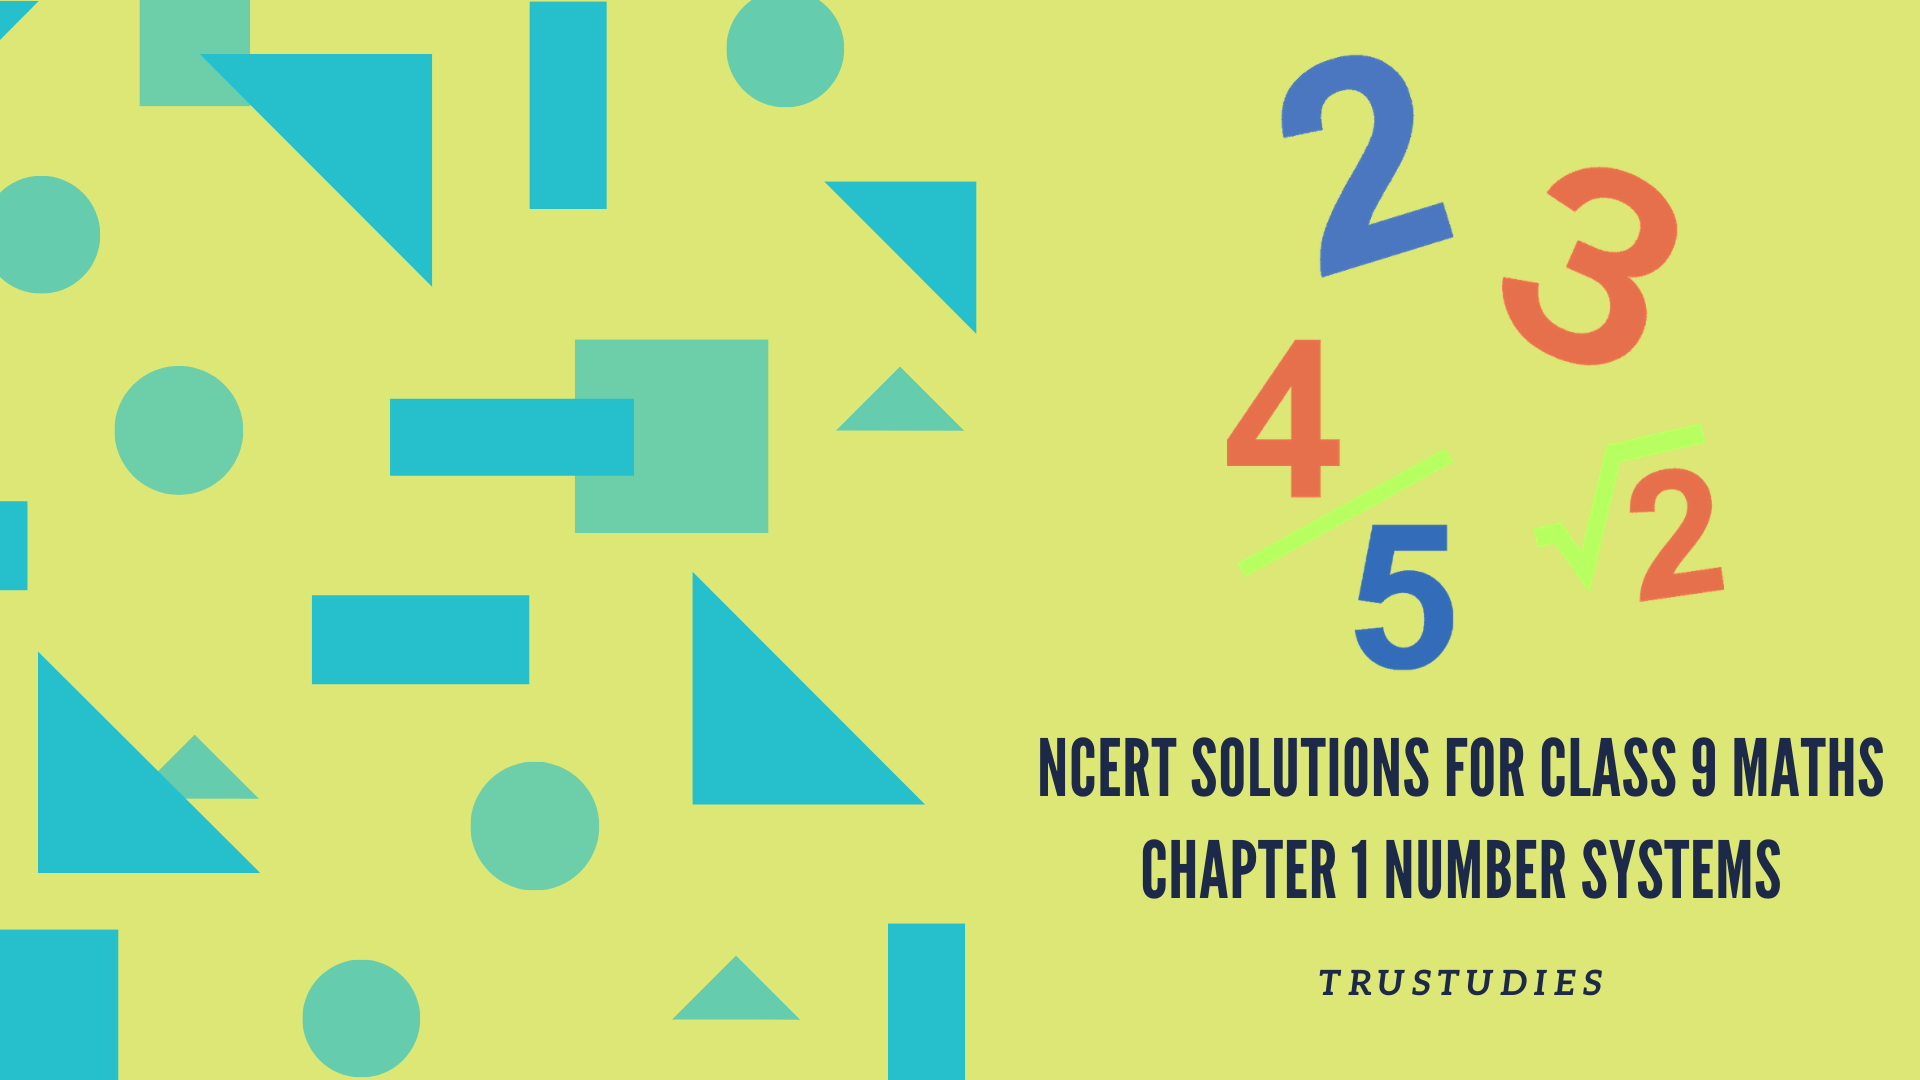 NCERT solutions for class 9 maths chapter 1 number systems banner image